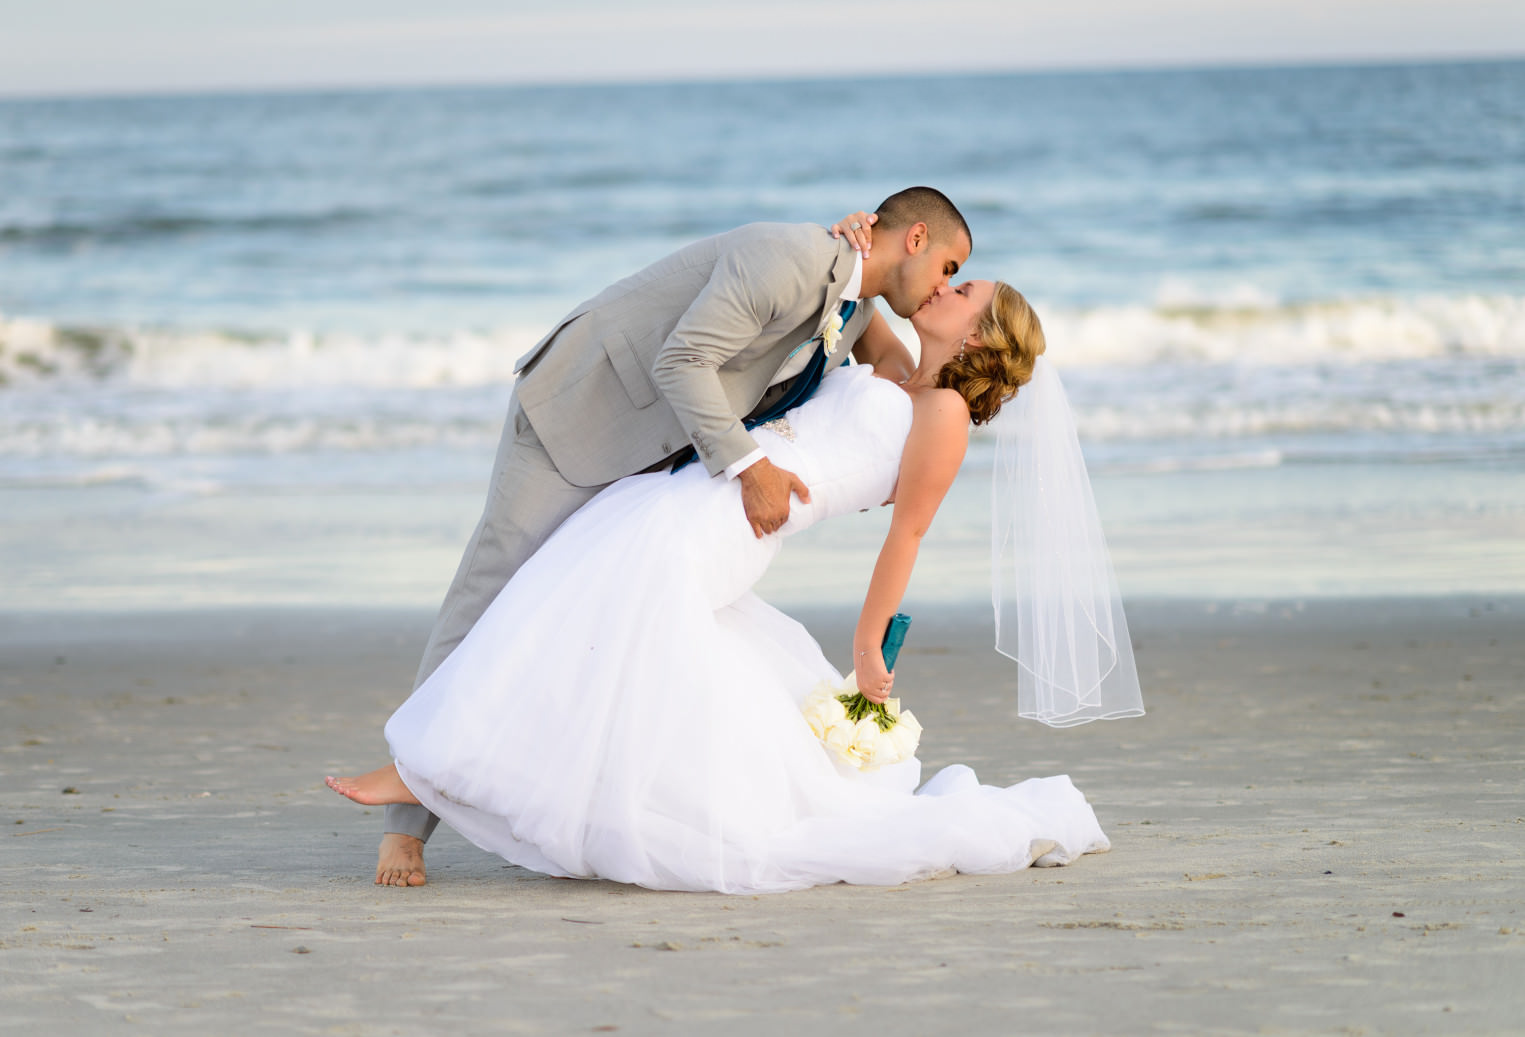 Dipping bride back for a kiss in front of the ocean